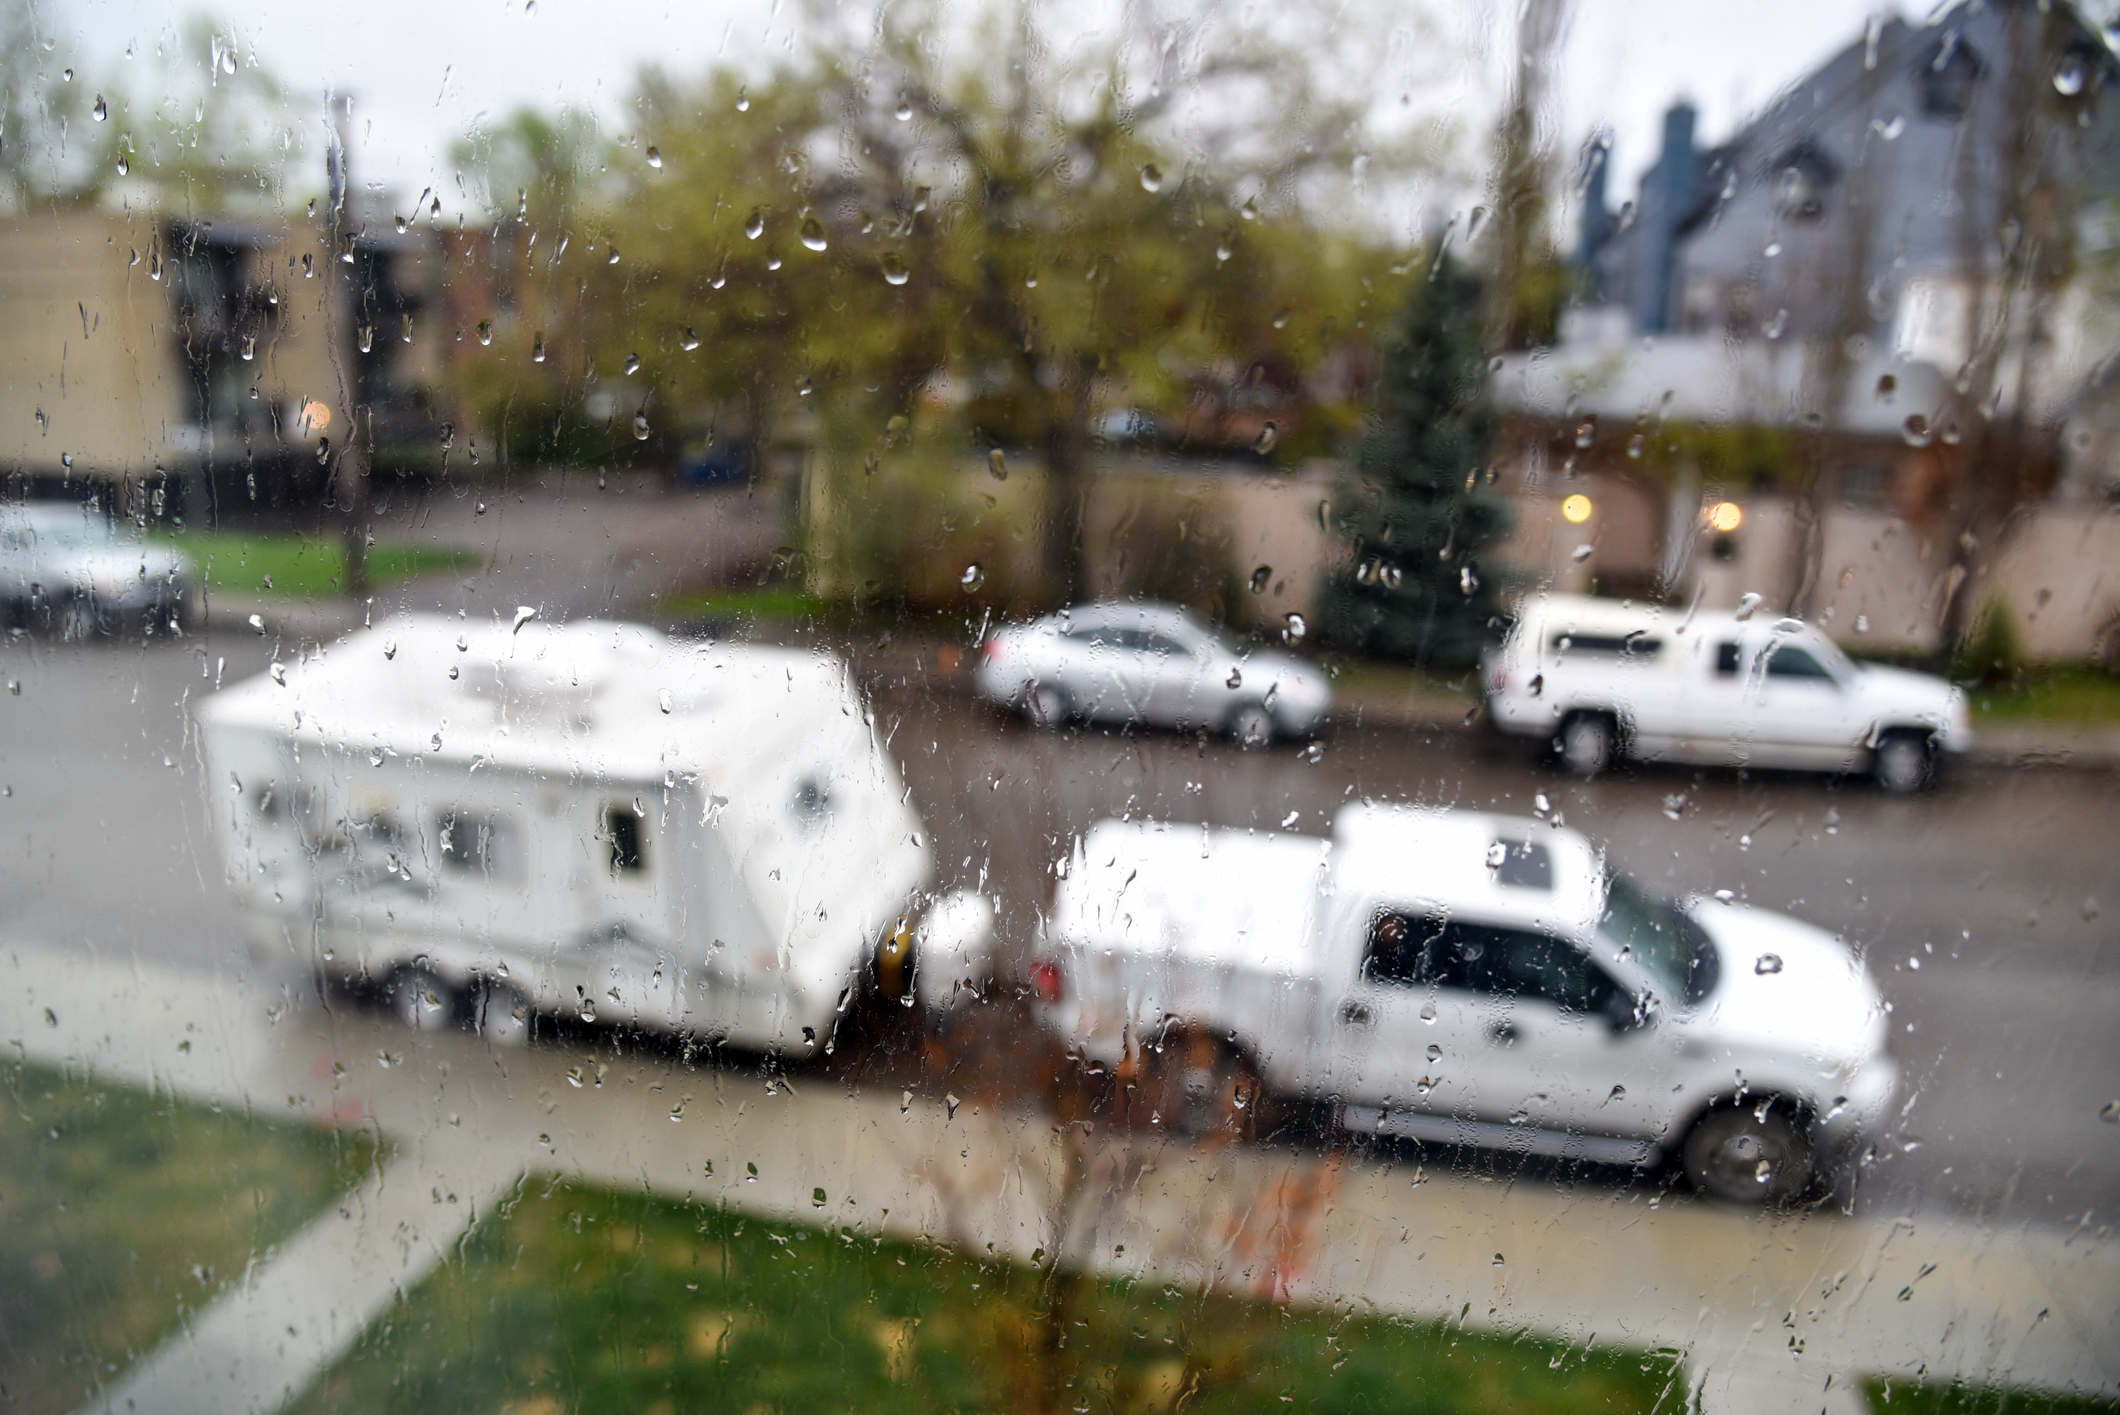 A travel trailer parked on a rainy street.